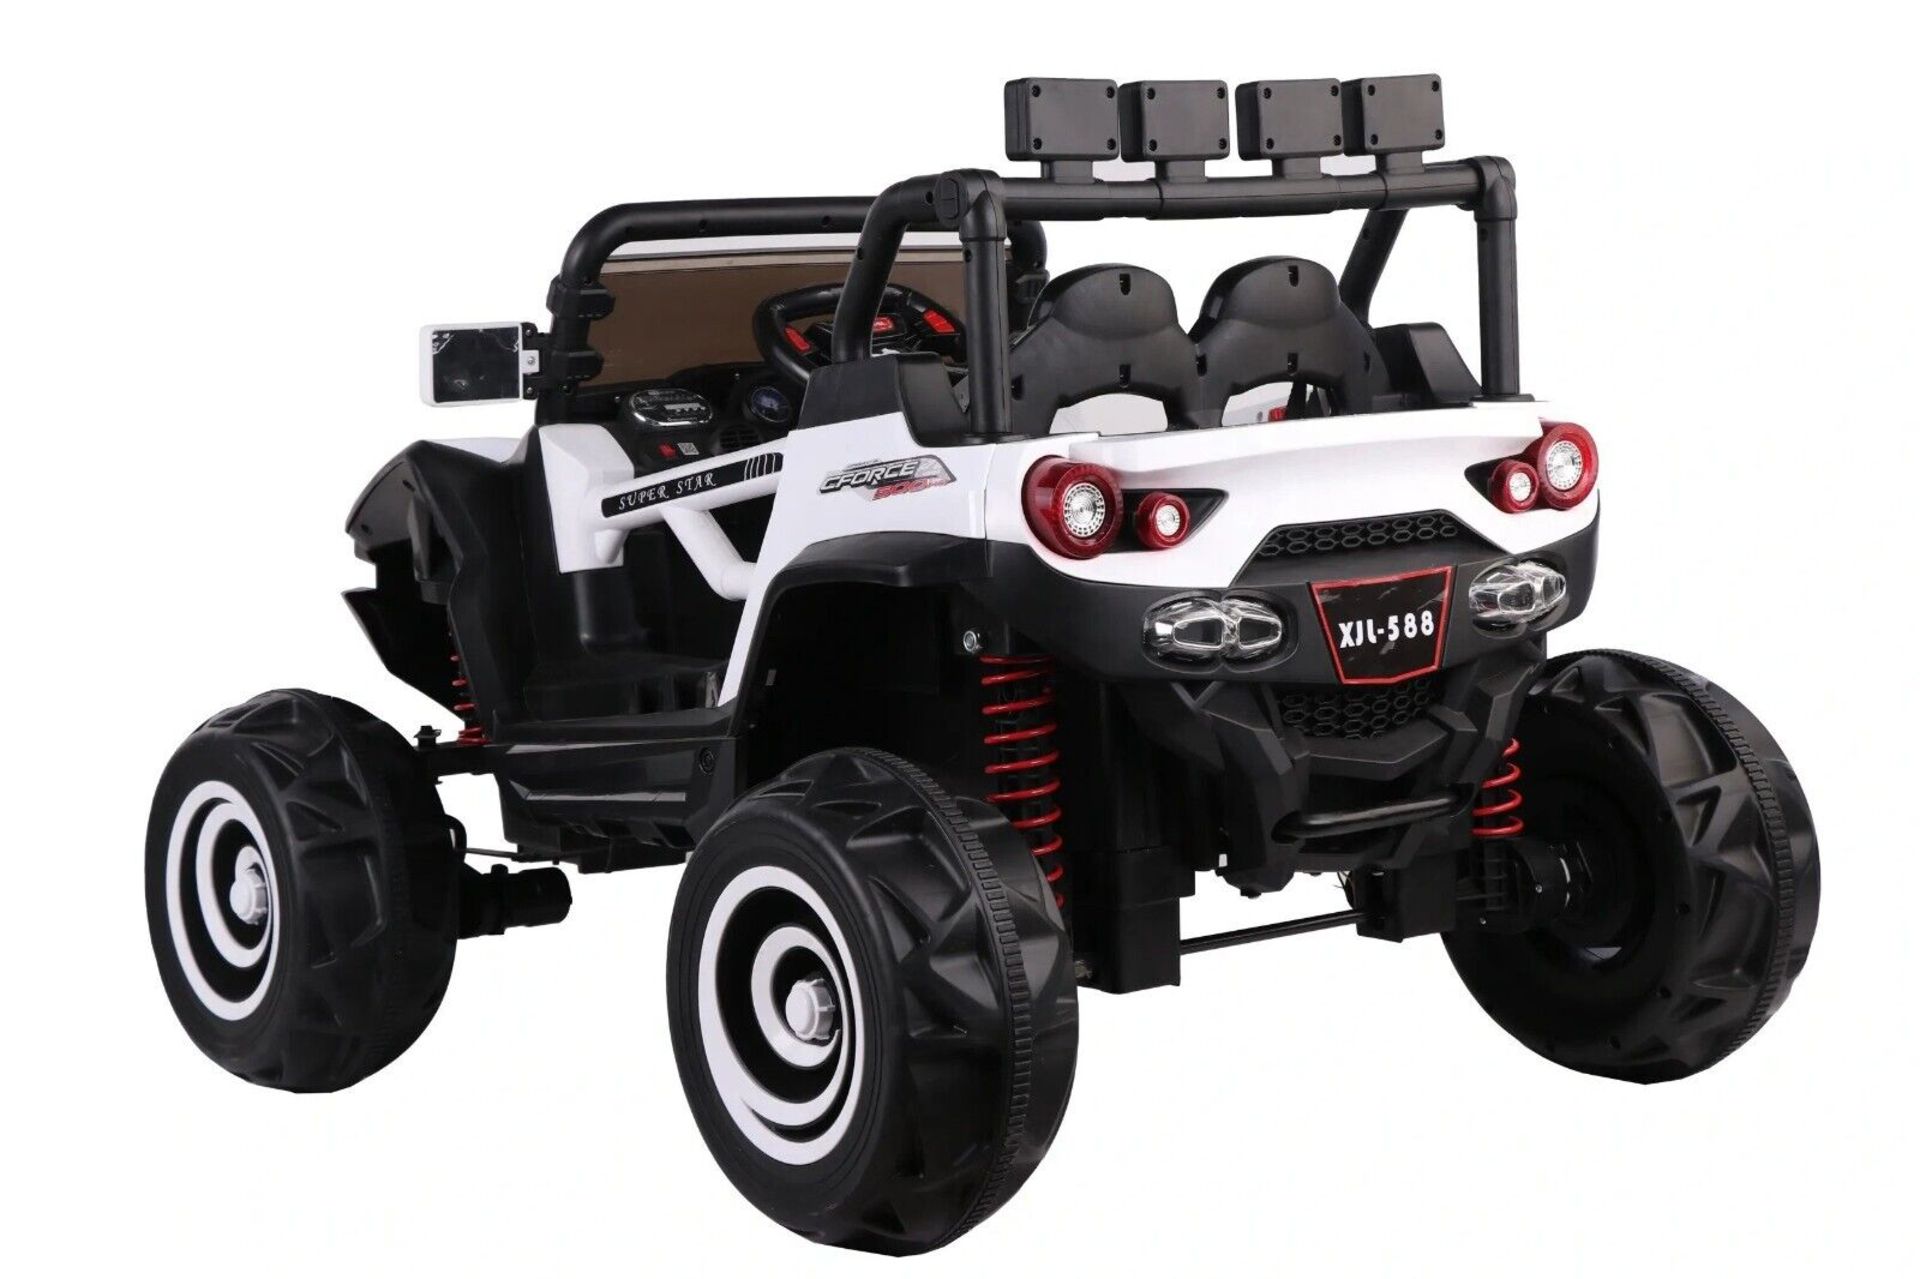 5 X BRAND NEW WHITE 4X4 ATV/UTV KIDS BUGGY JEEP ELECTRIC CAR WITH REMOTE BRAND NEW BOXED - Image 2 of 4